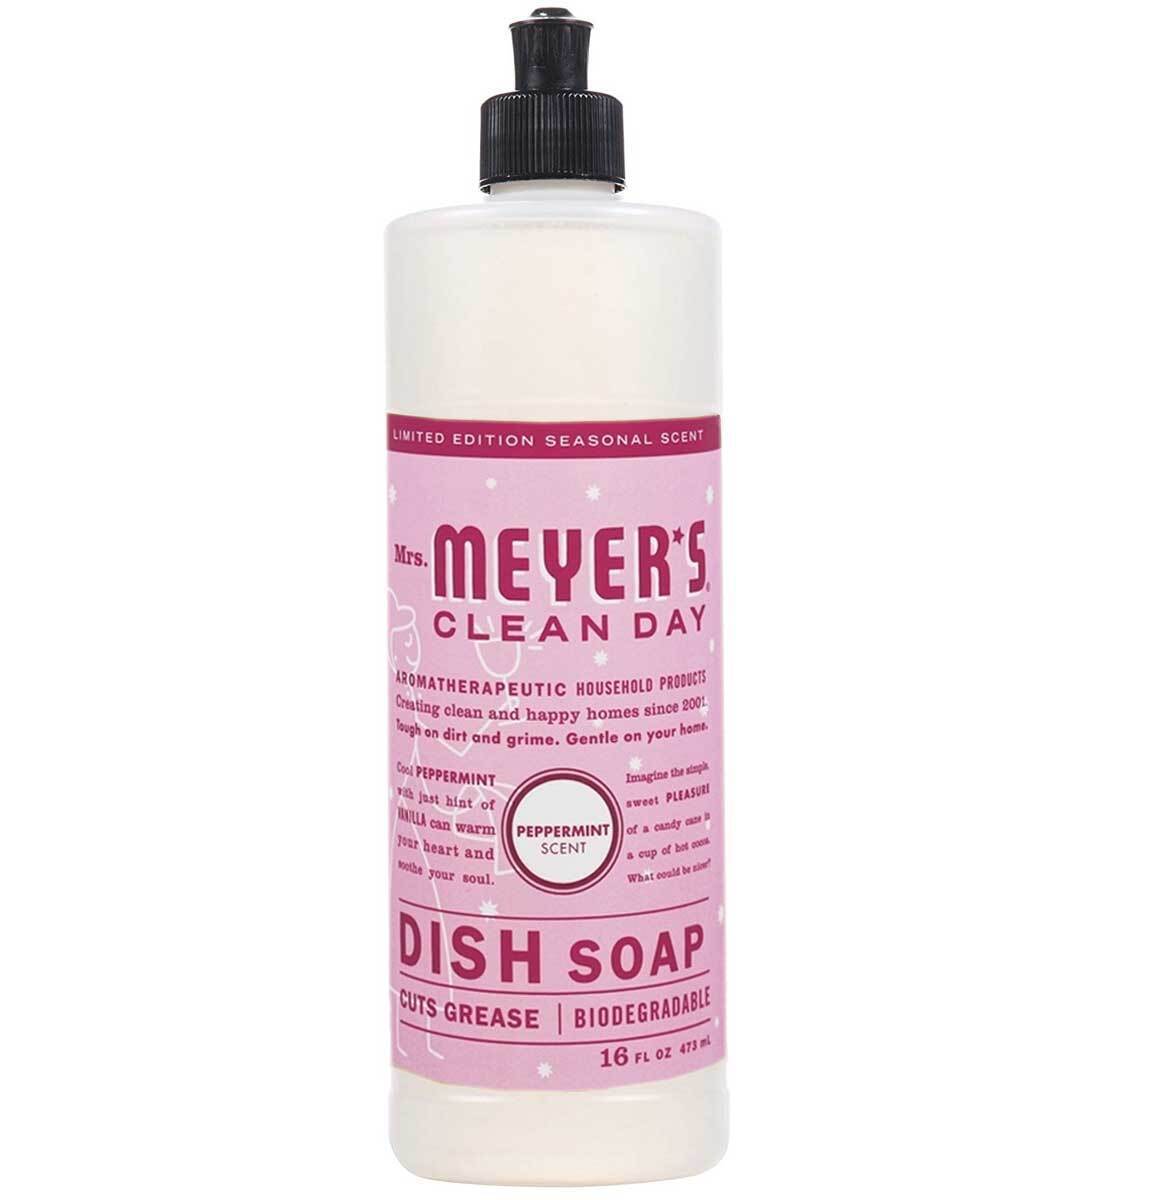 Mrs Meyers Liquid Dish Soap Peppermint Seasonal Scent - 16 Oz - Pack of 6 Mrs. Meyer's Does not apply